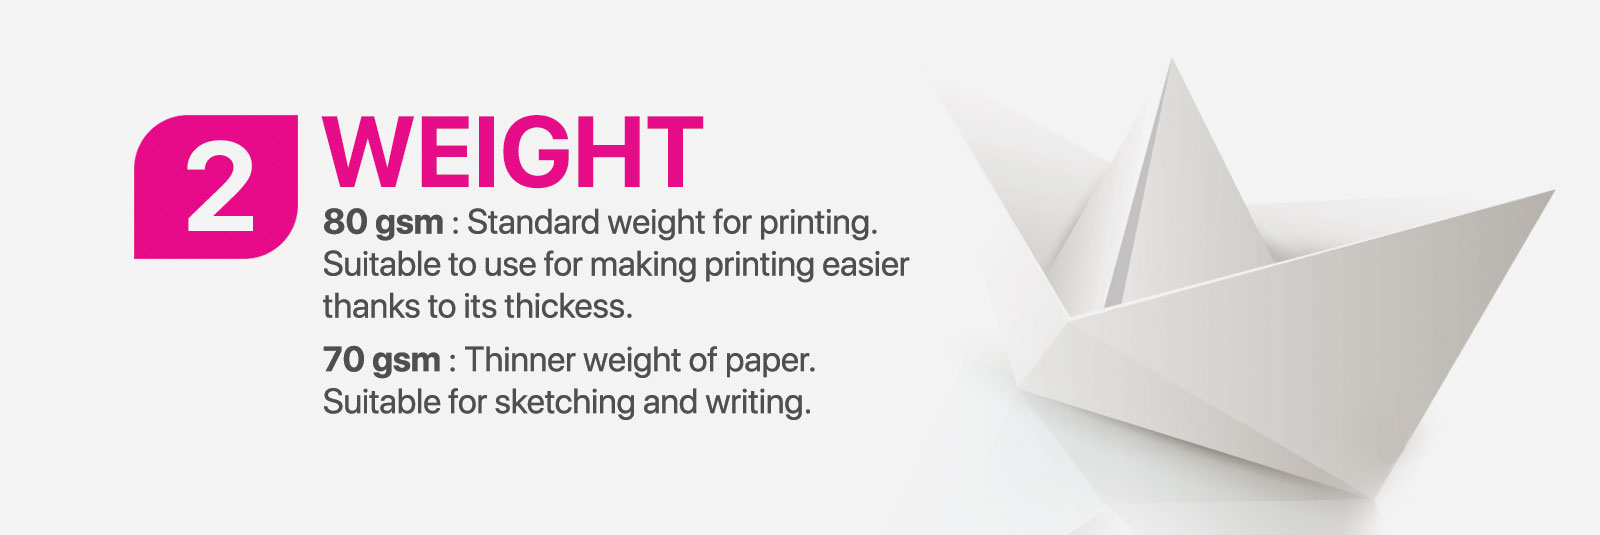 Weight - 80 gsm Standard weight for printing. Suitable to use for making printing easier thanks to its thickess. 70 gsm Thinner weight of paper. Suitable for sketching and writing.